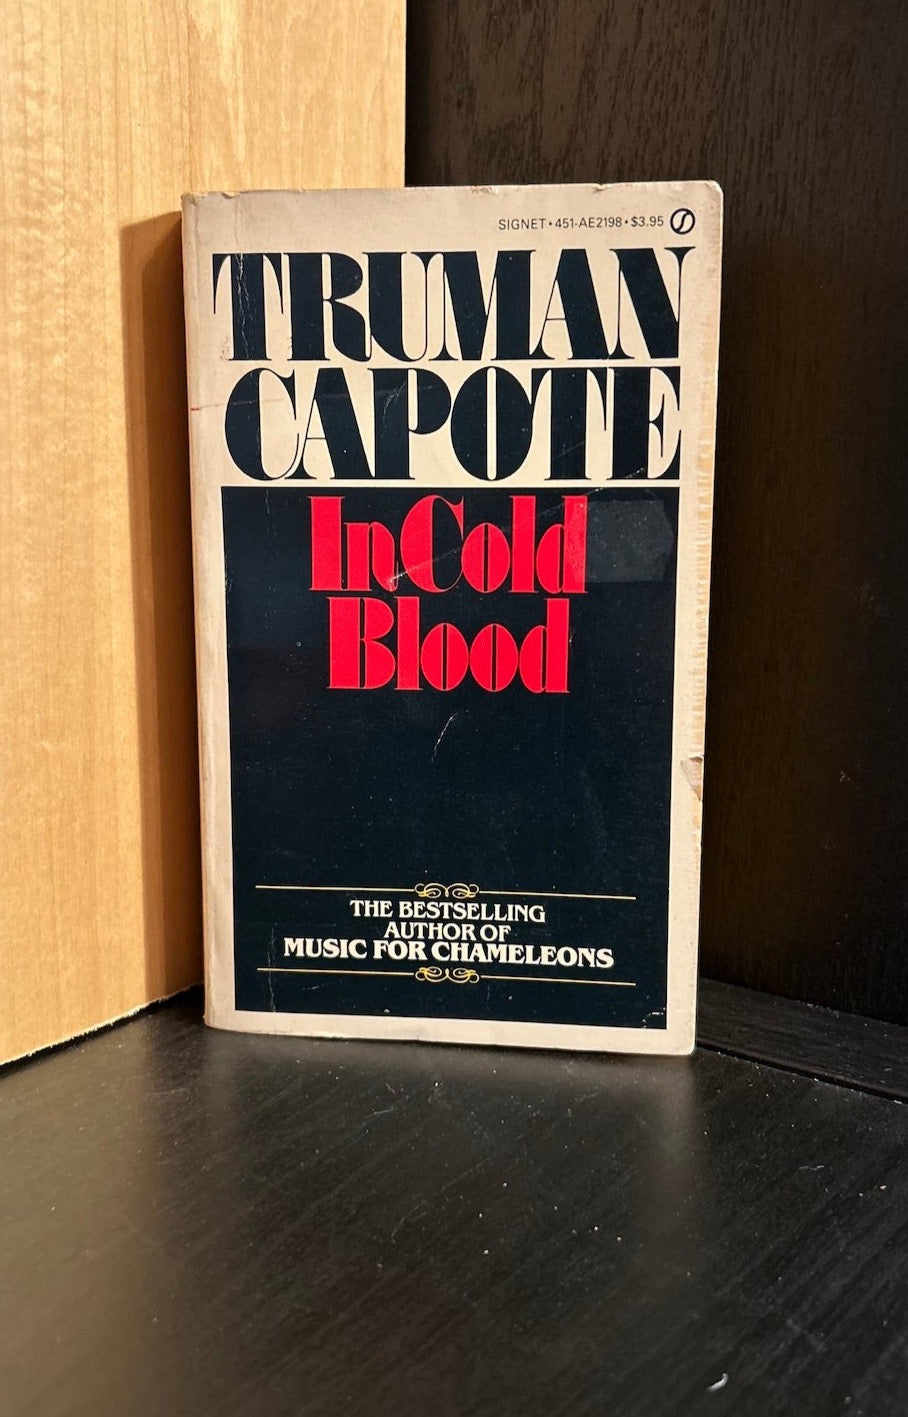 In Cold Blood - Truman Capote - Vintage